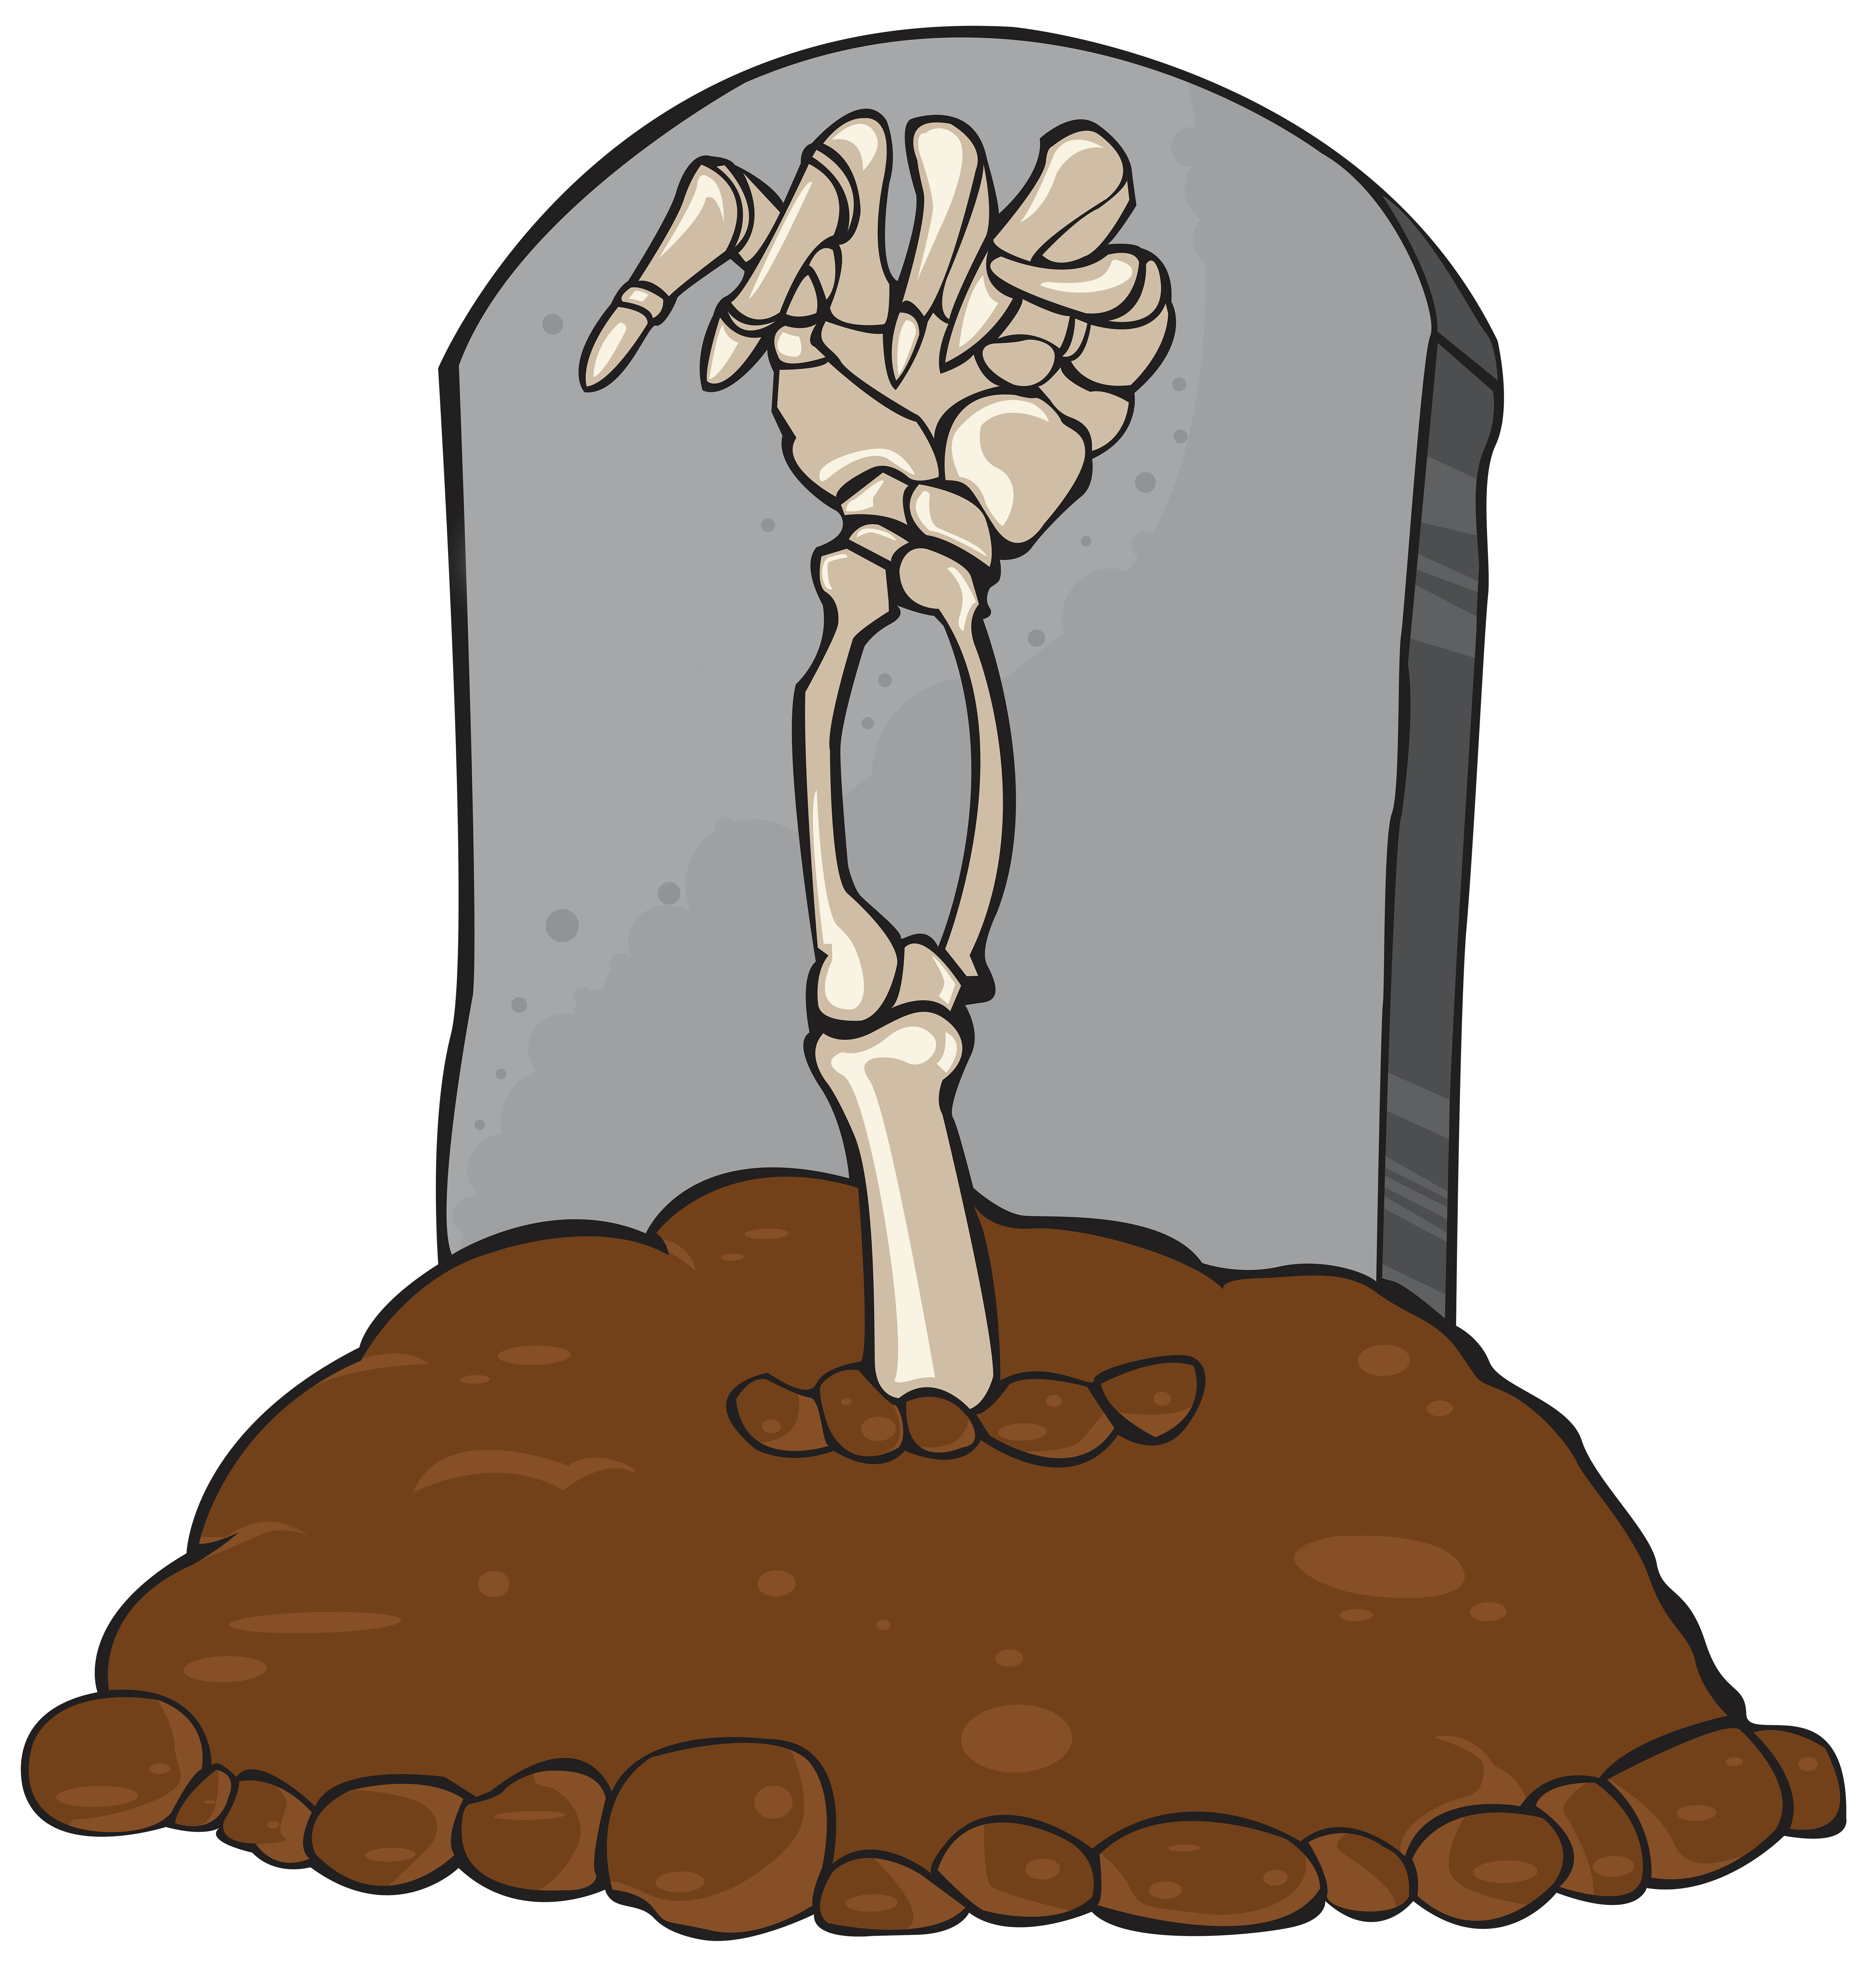 Gravestone silhouette at getdrawings. Headstone clipart tree life